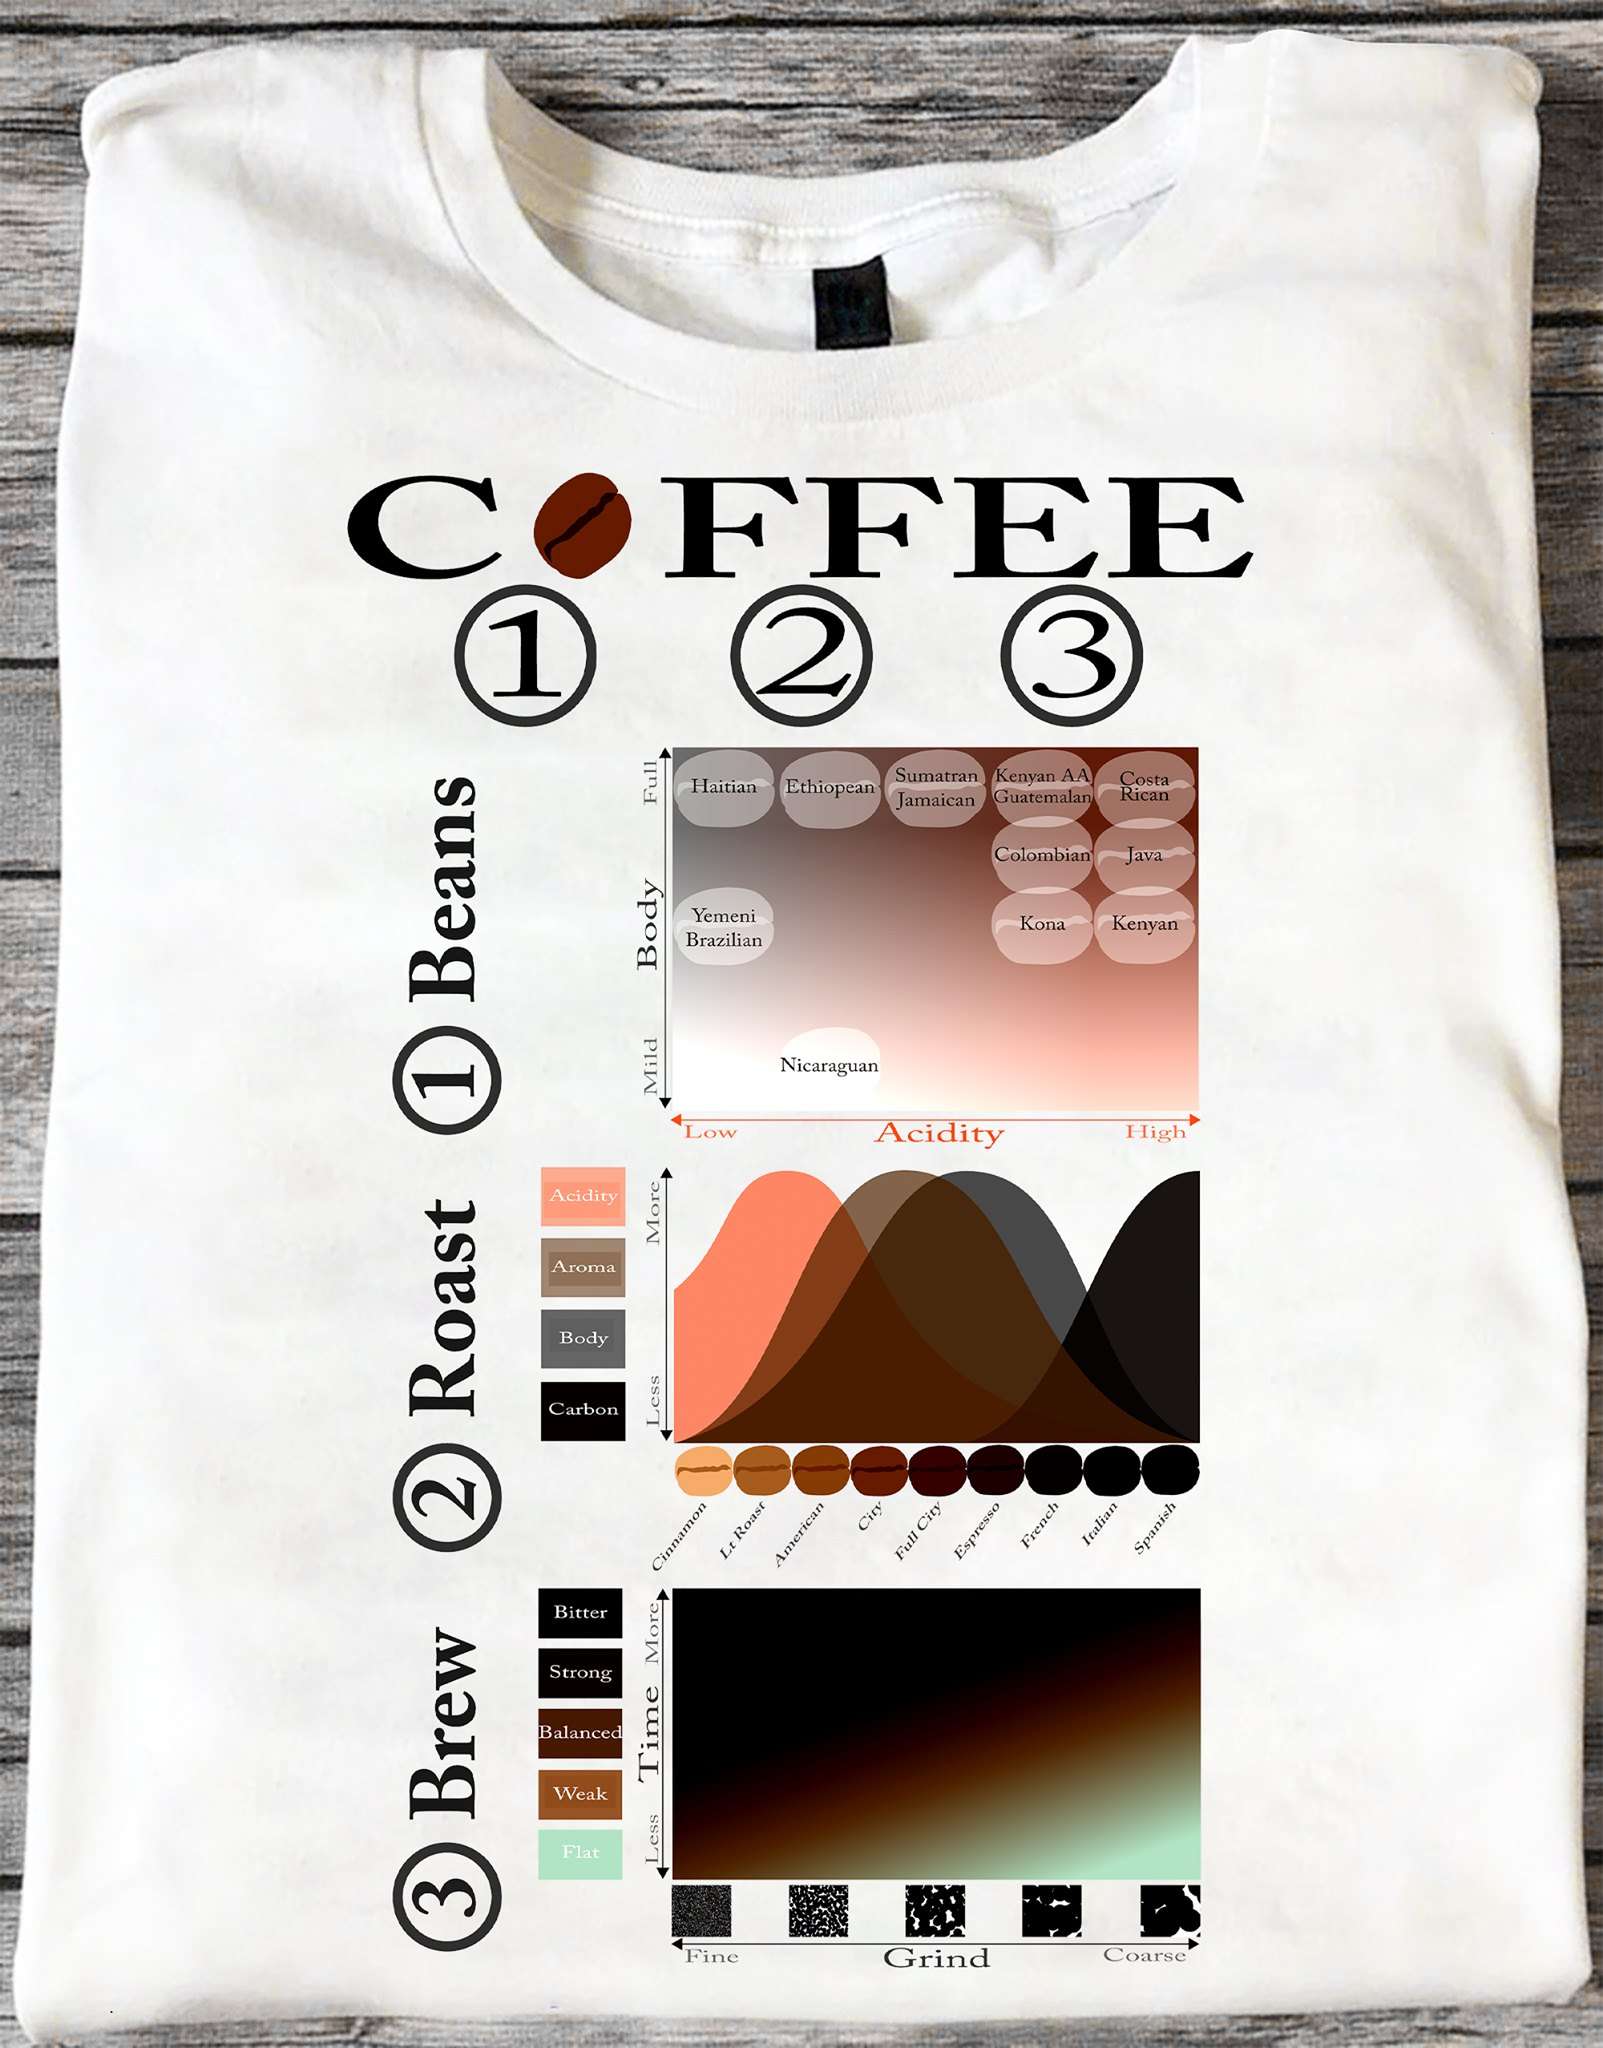 Coffee brew, Coffee roast, coffee beans - Gift for coffee people